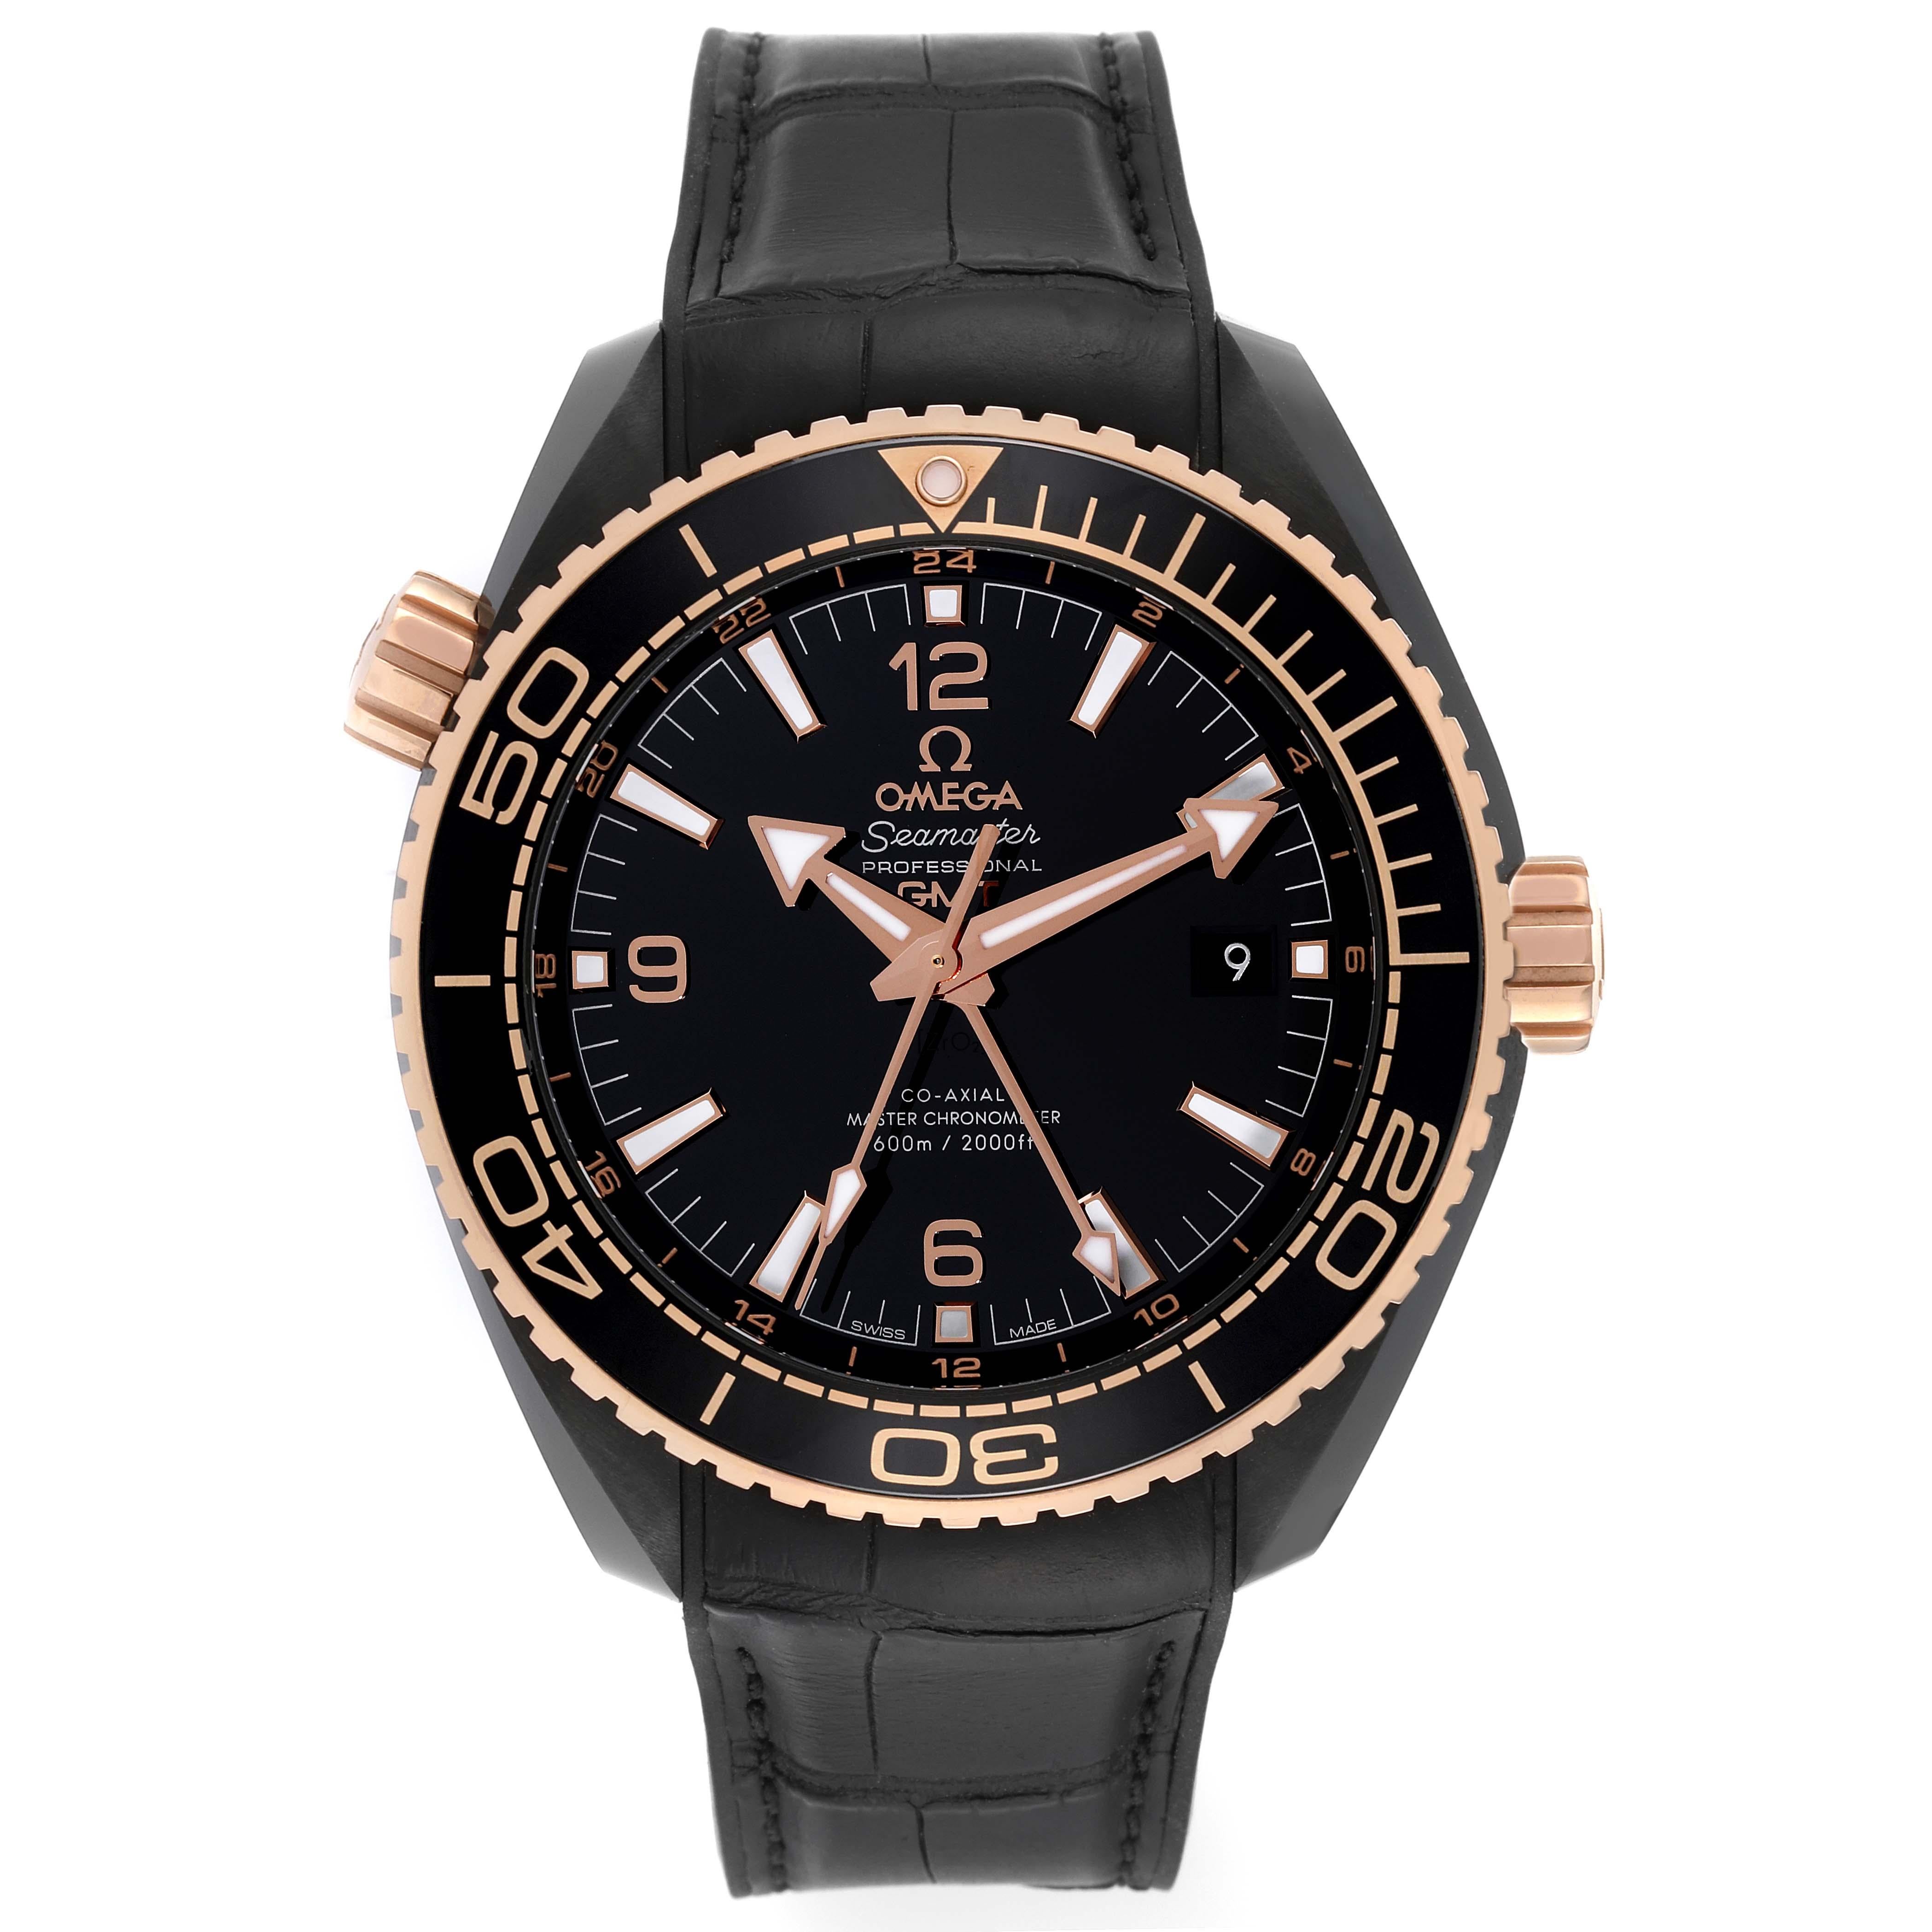 Omega Planet Ocean Deep Black Ceramic GMT Watch 215.63.46.22.01.001 Box Card. Automatic self-winding movement with Co-Axial escapement. Certified Master Chronometer, approved by METAS,resistant to magnetic fields reaching 15,000 gauss. GMTand time